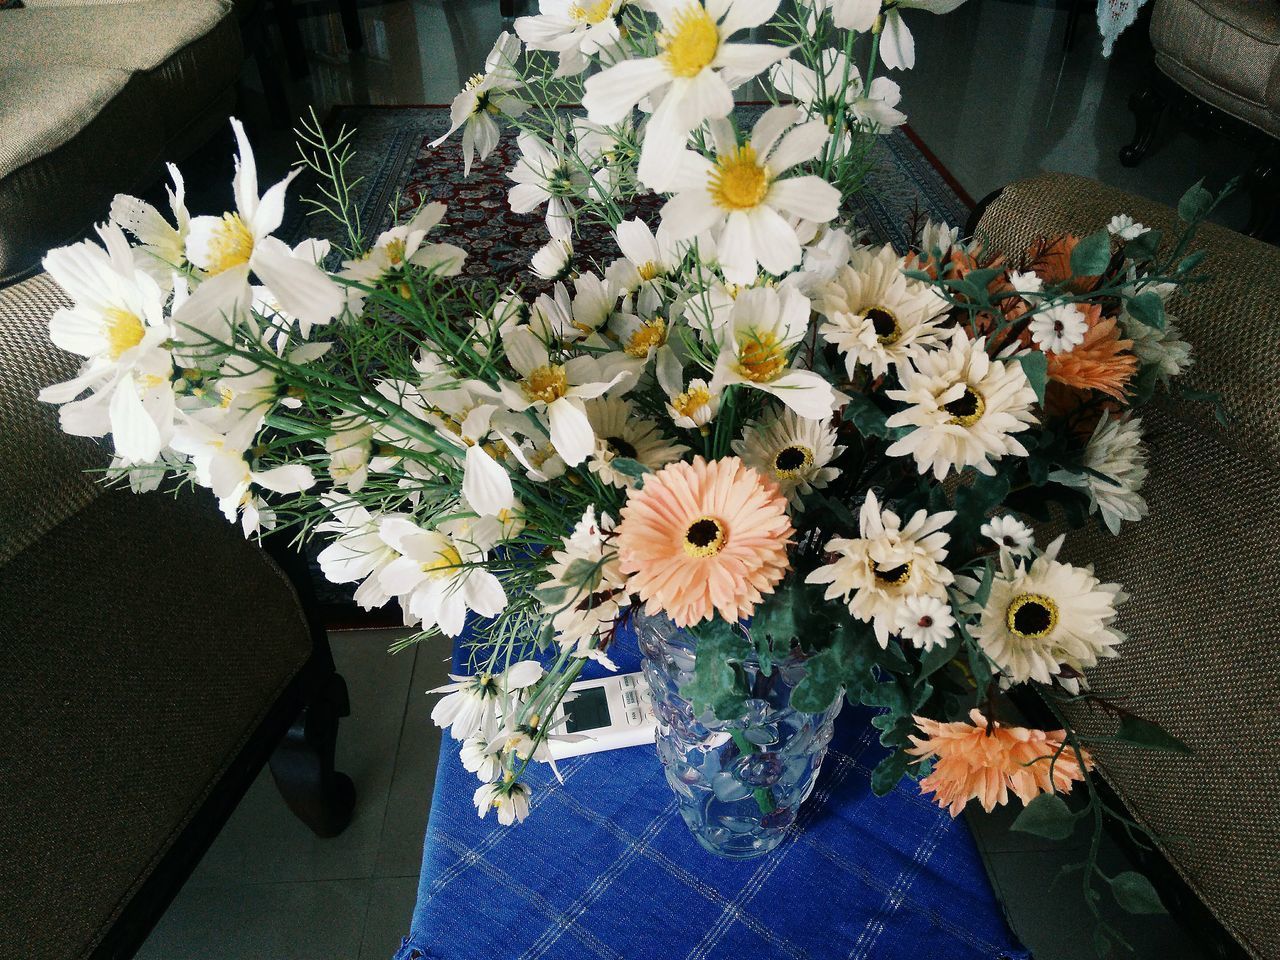 HIGH ANGLE VIEW OF FLOWERS ON VASE